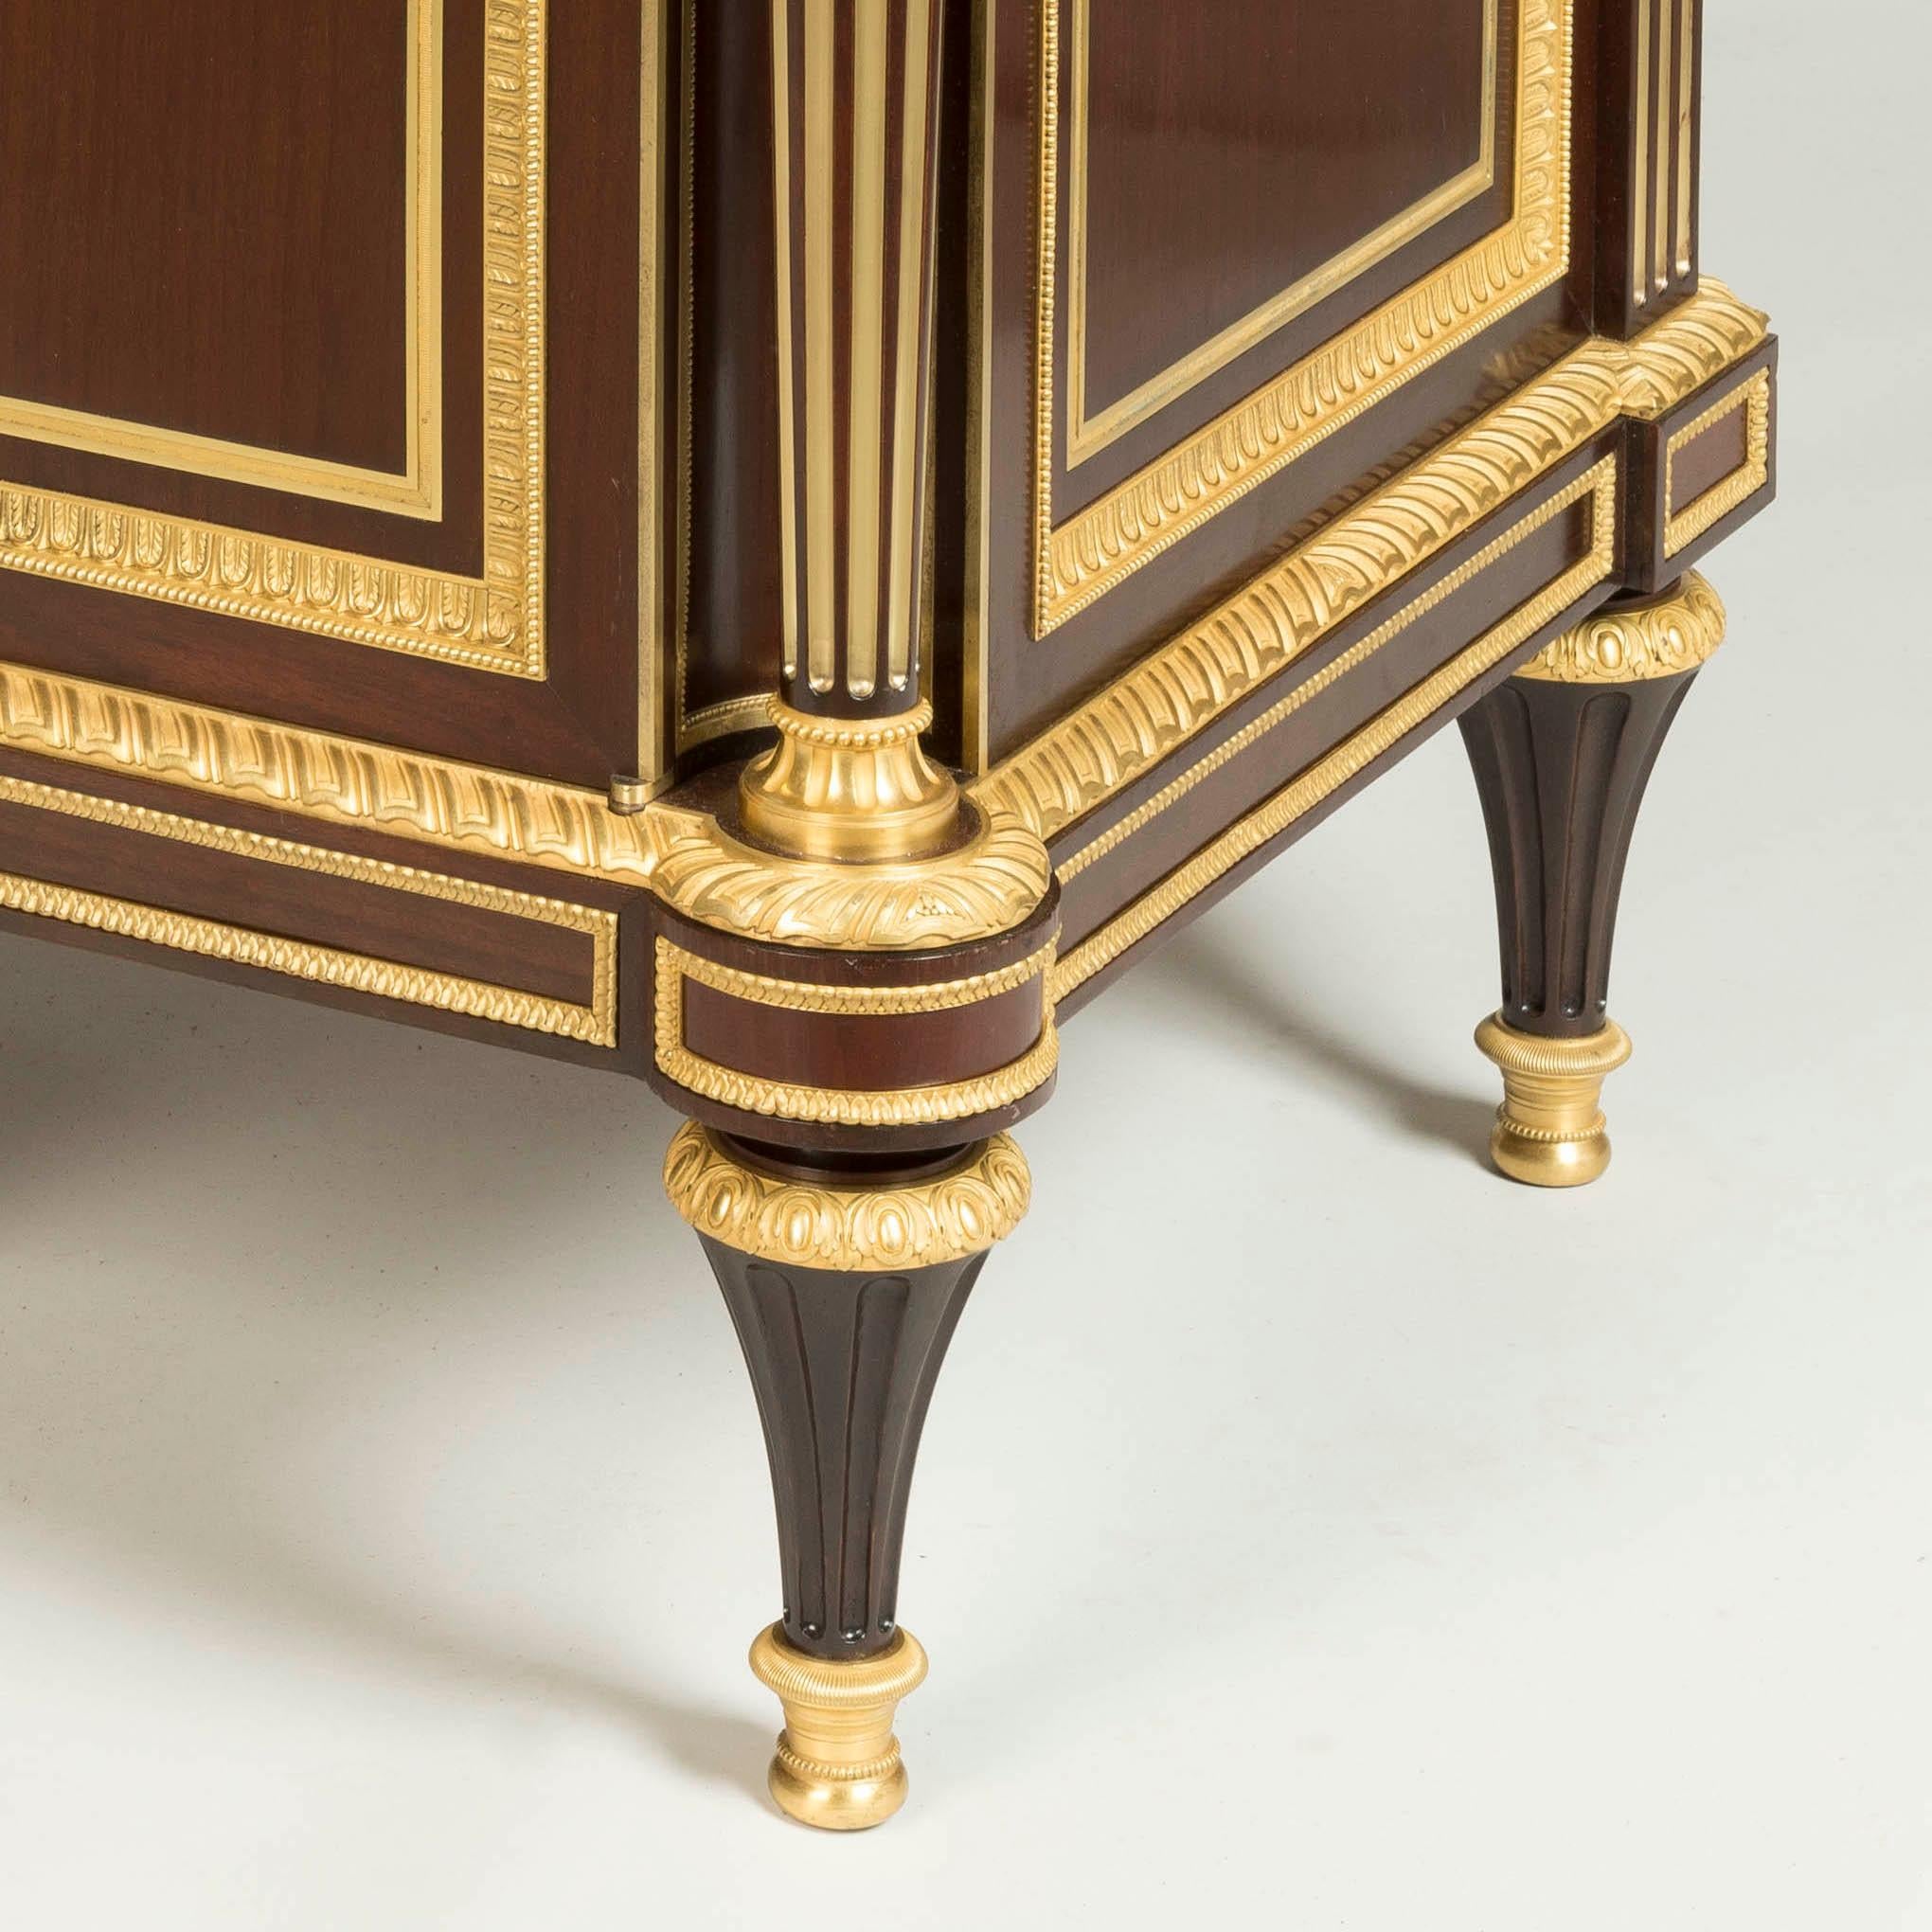 19th Century French Marble Top Commode in the Louis XVI Style by Henry Dasson For Sale 5